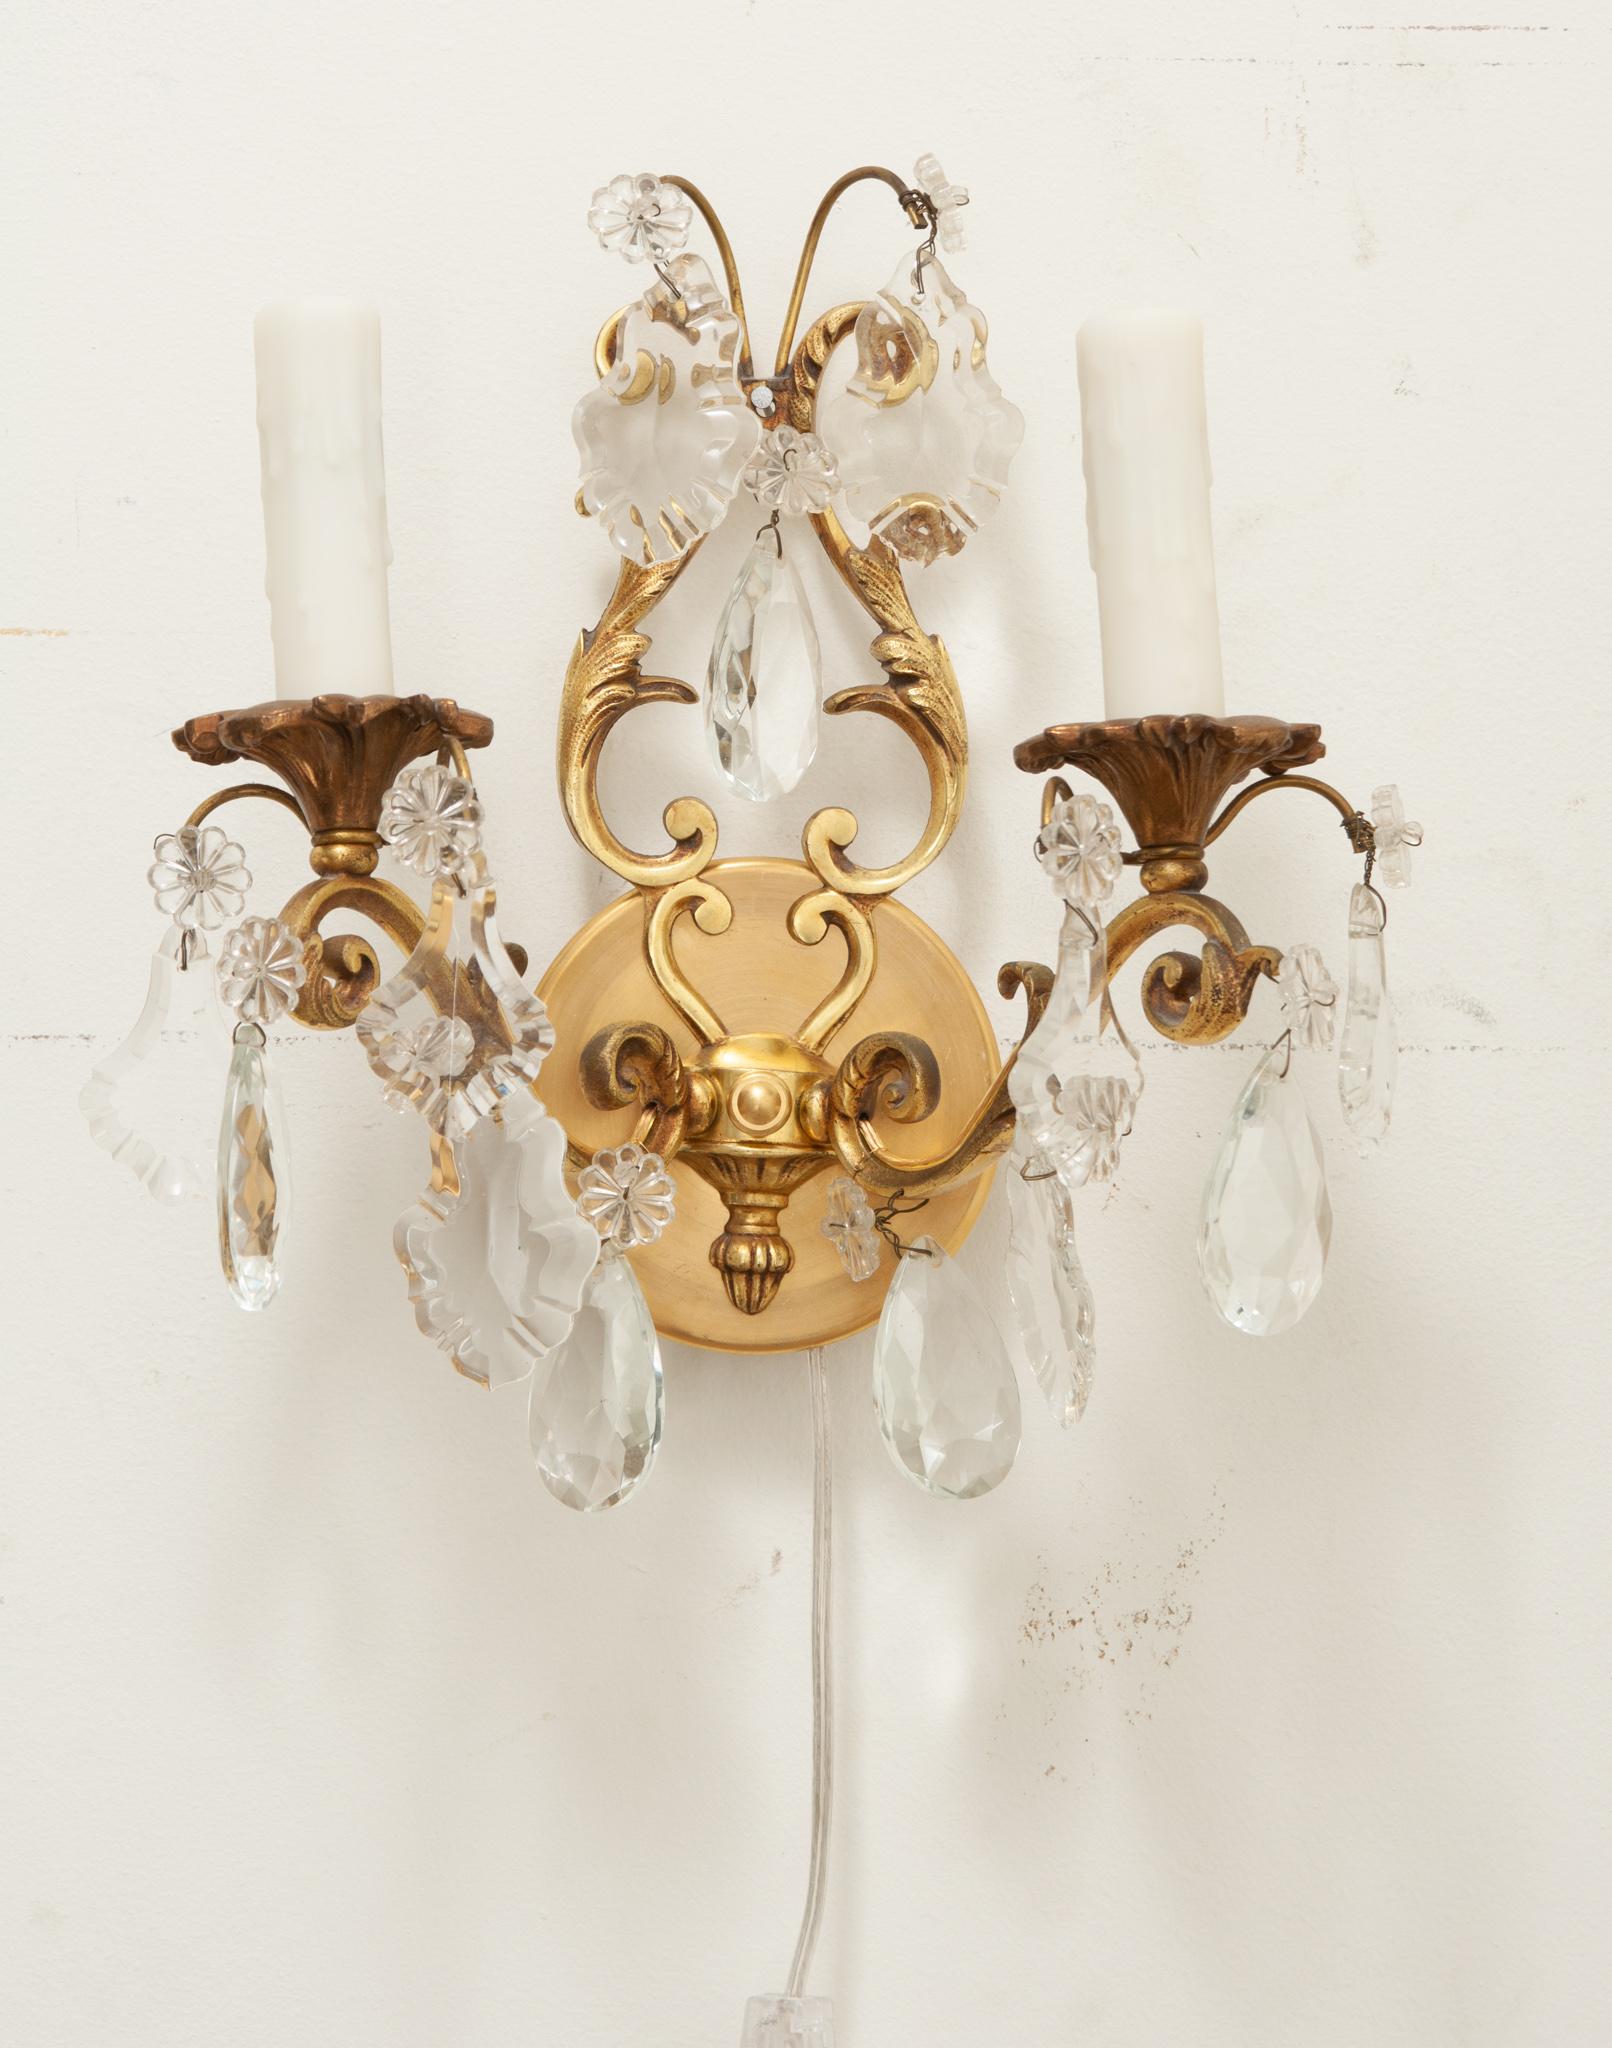 An elegant pair of petite brass and crystal French wall sconces. Each sconce has two brass arms with faux candle covers and cut crystal drops. The pair have been cleaned and wired for US electrical using UL certified parts. Be sure to look at the